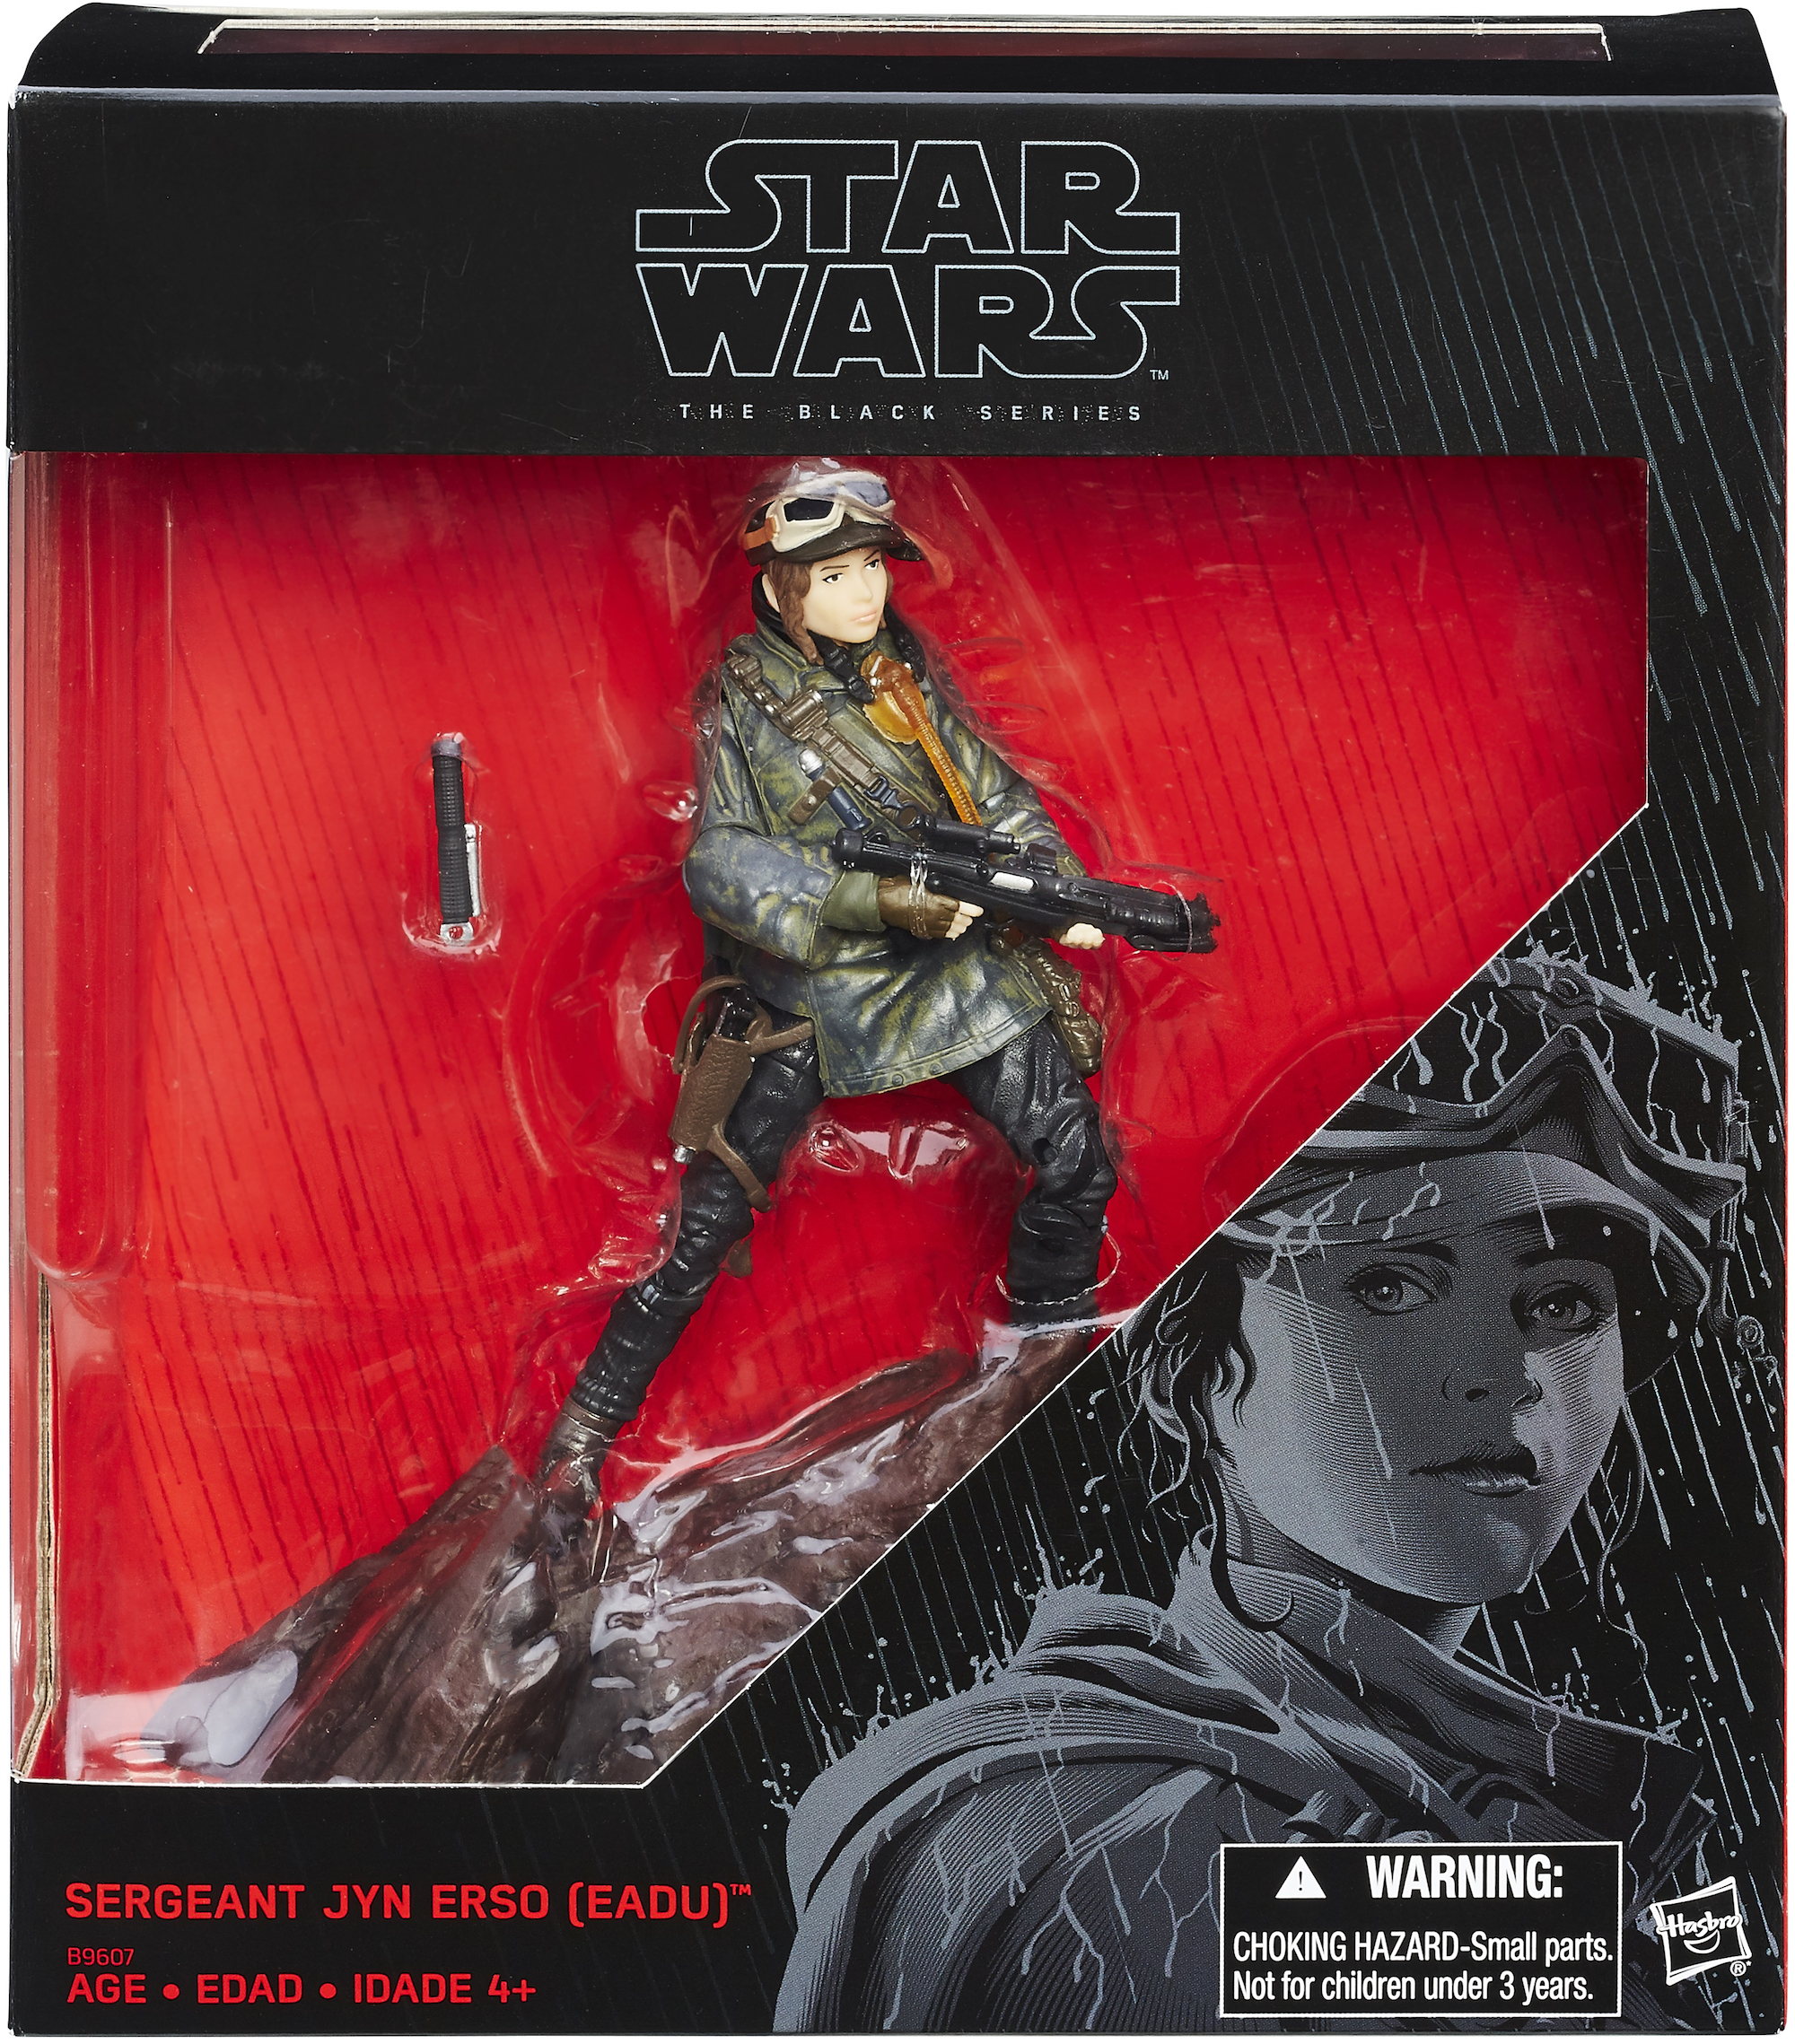 Star Wars Rogue One Black Series 6" Kmart Exclusive Sergeant Jyn Erso In Hand 